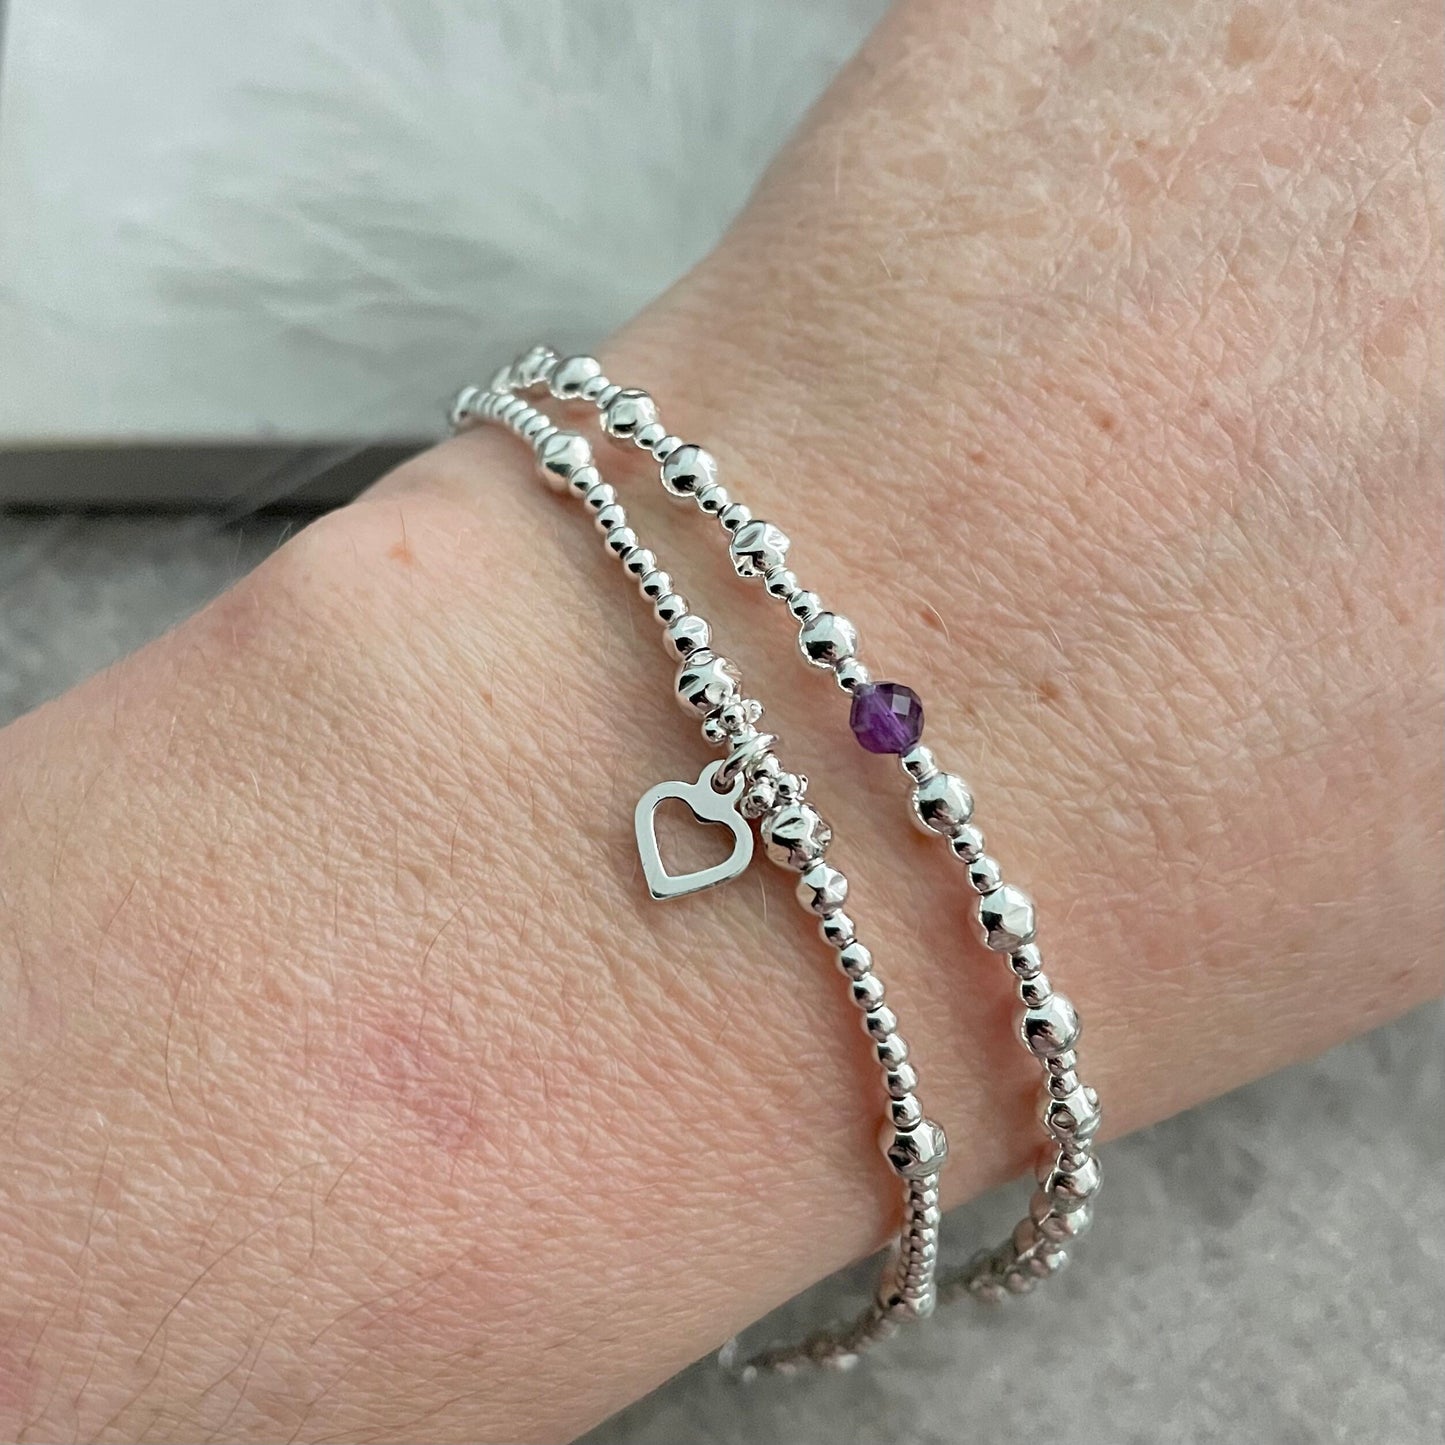 Birthstone Bracelet Set made with Birthstone and Sterling Silver, Birthday Gift for Women